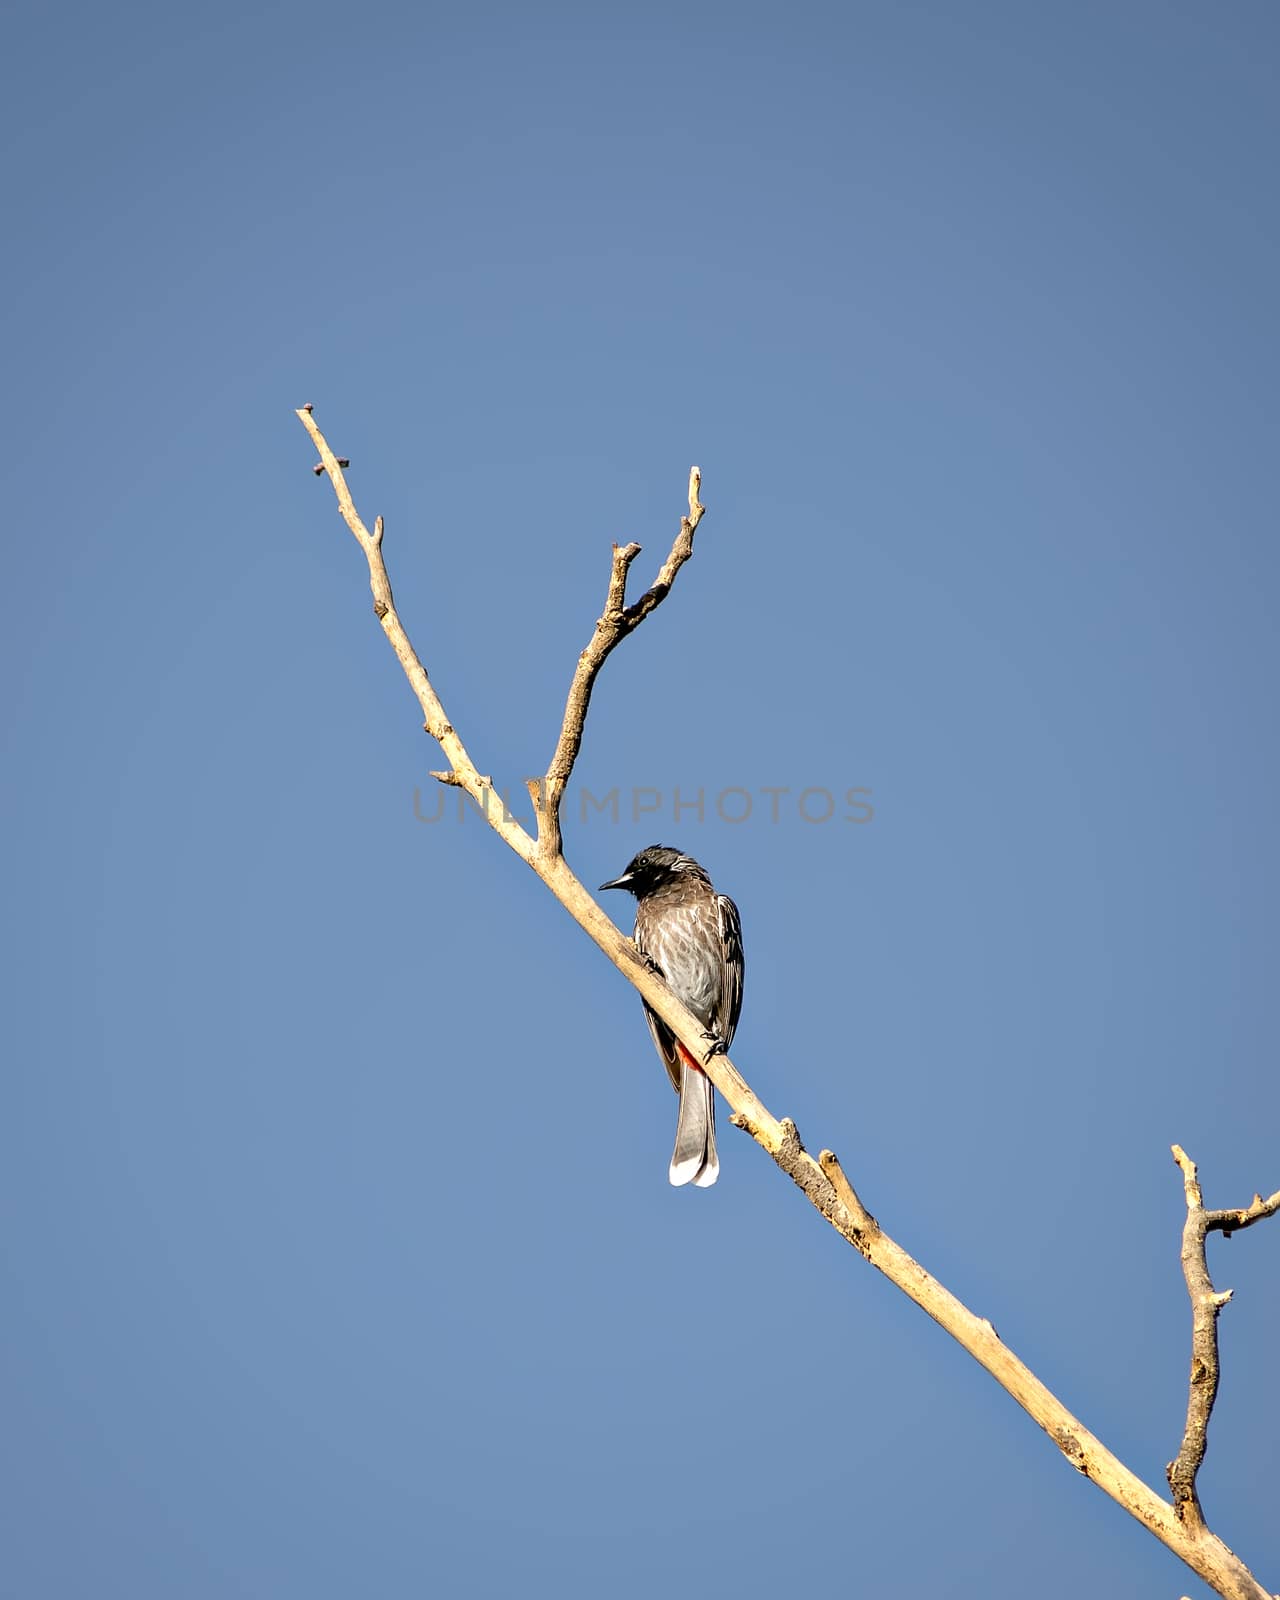 Red vented bulbul sitting on dry tree branch with clear blue sky background.